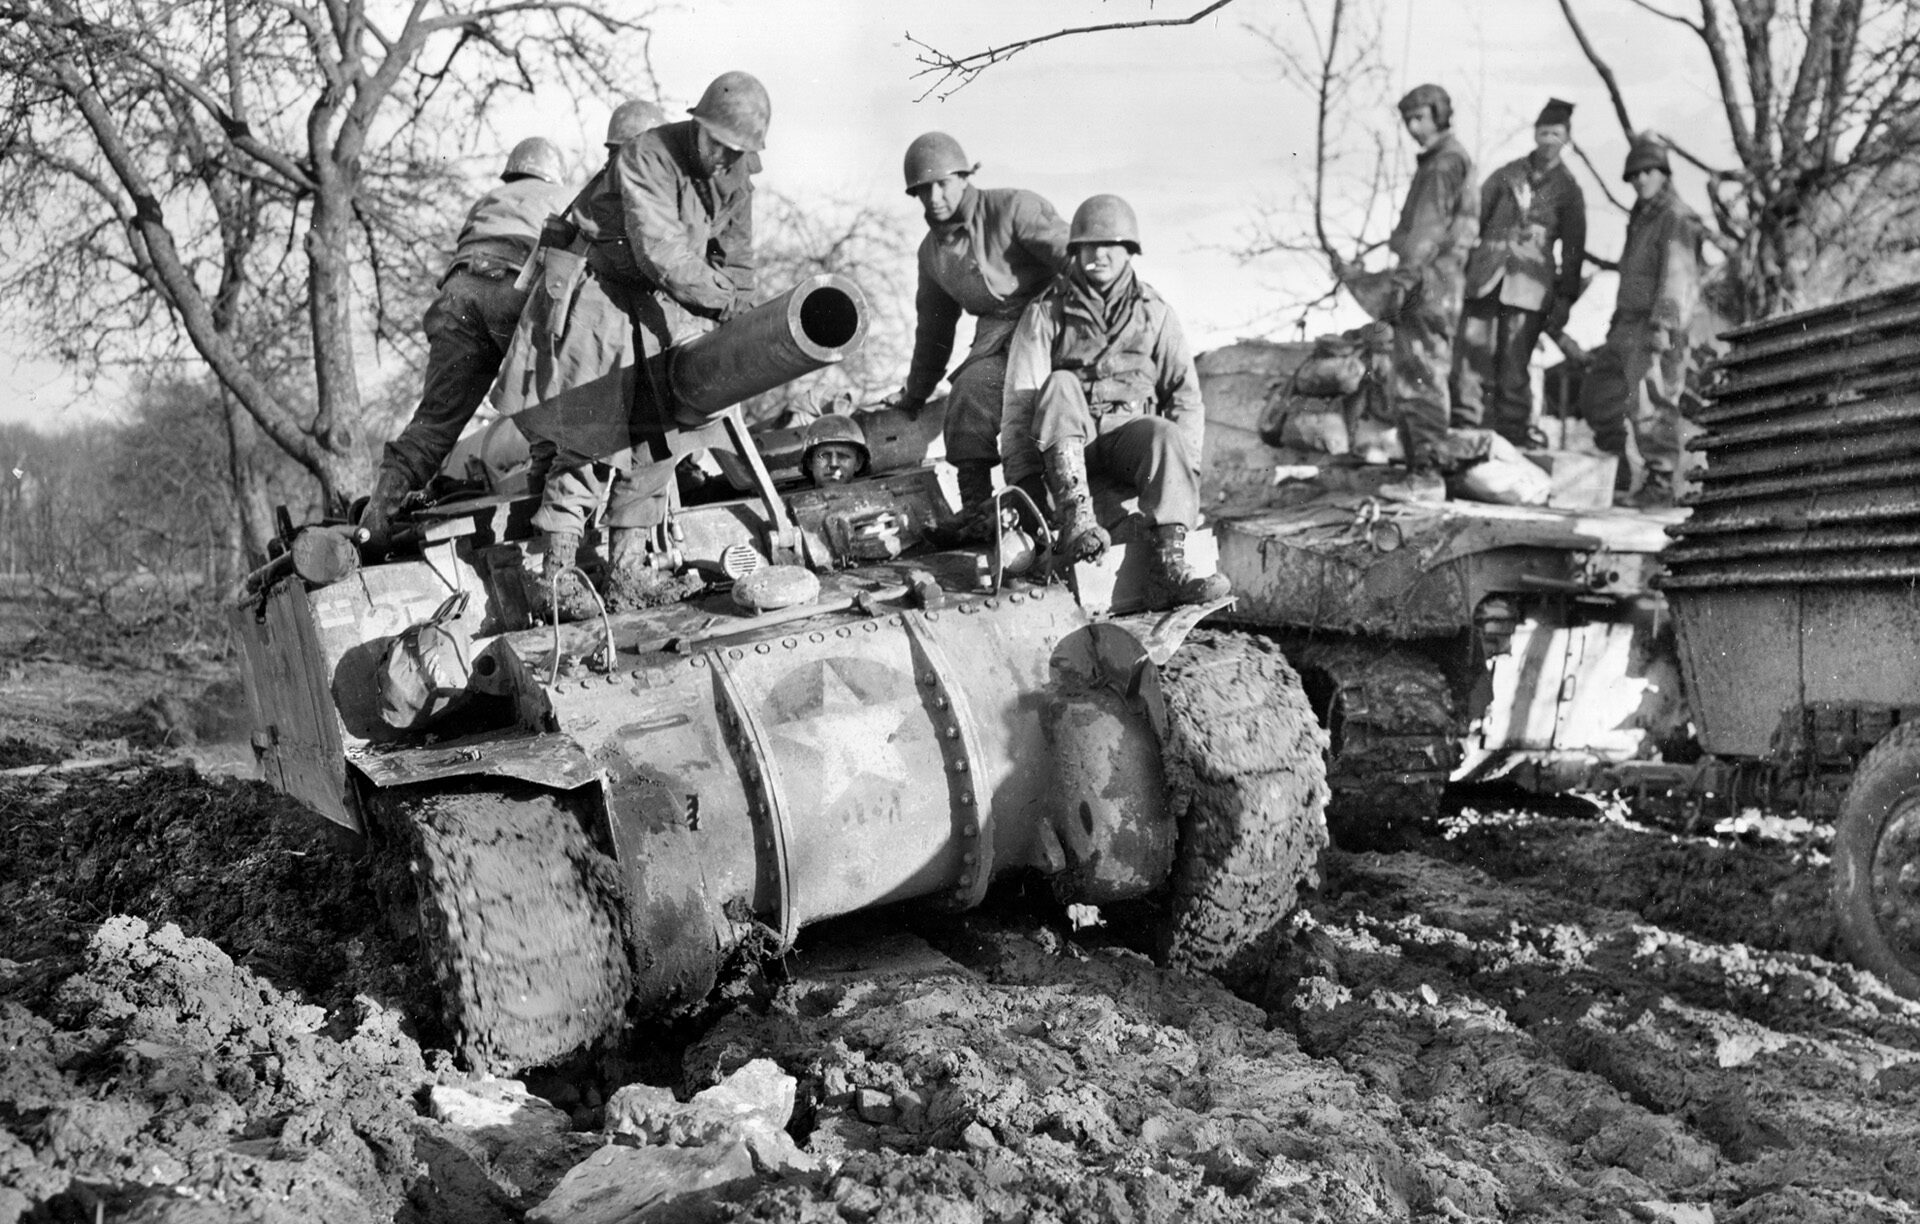 This self-propelled 155mm gun of the 737th Tank Battalion struggles through thick mud as it crosses the countryside in Luxembourg. Winter weather hindered the progress of the armor in support of the 5th Infantry Division advance of early 1945. 